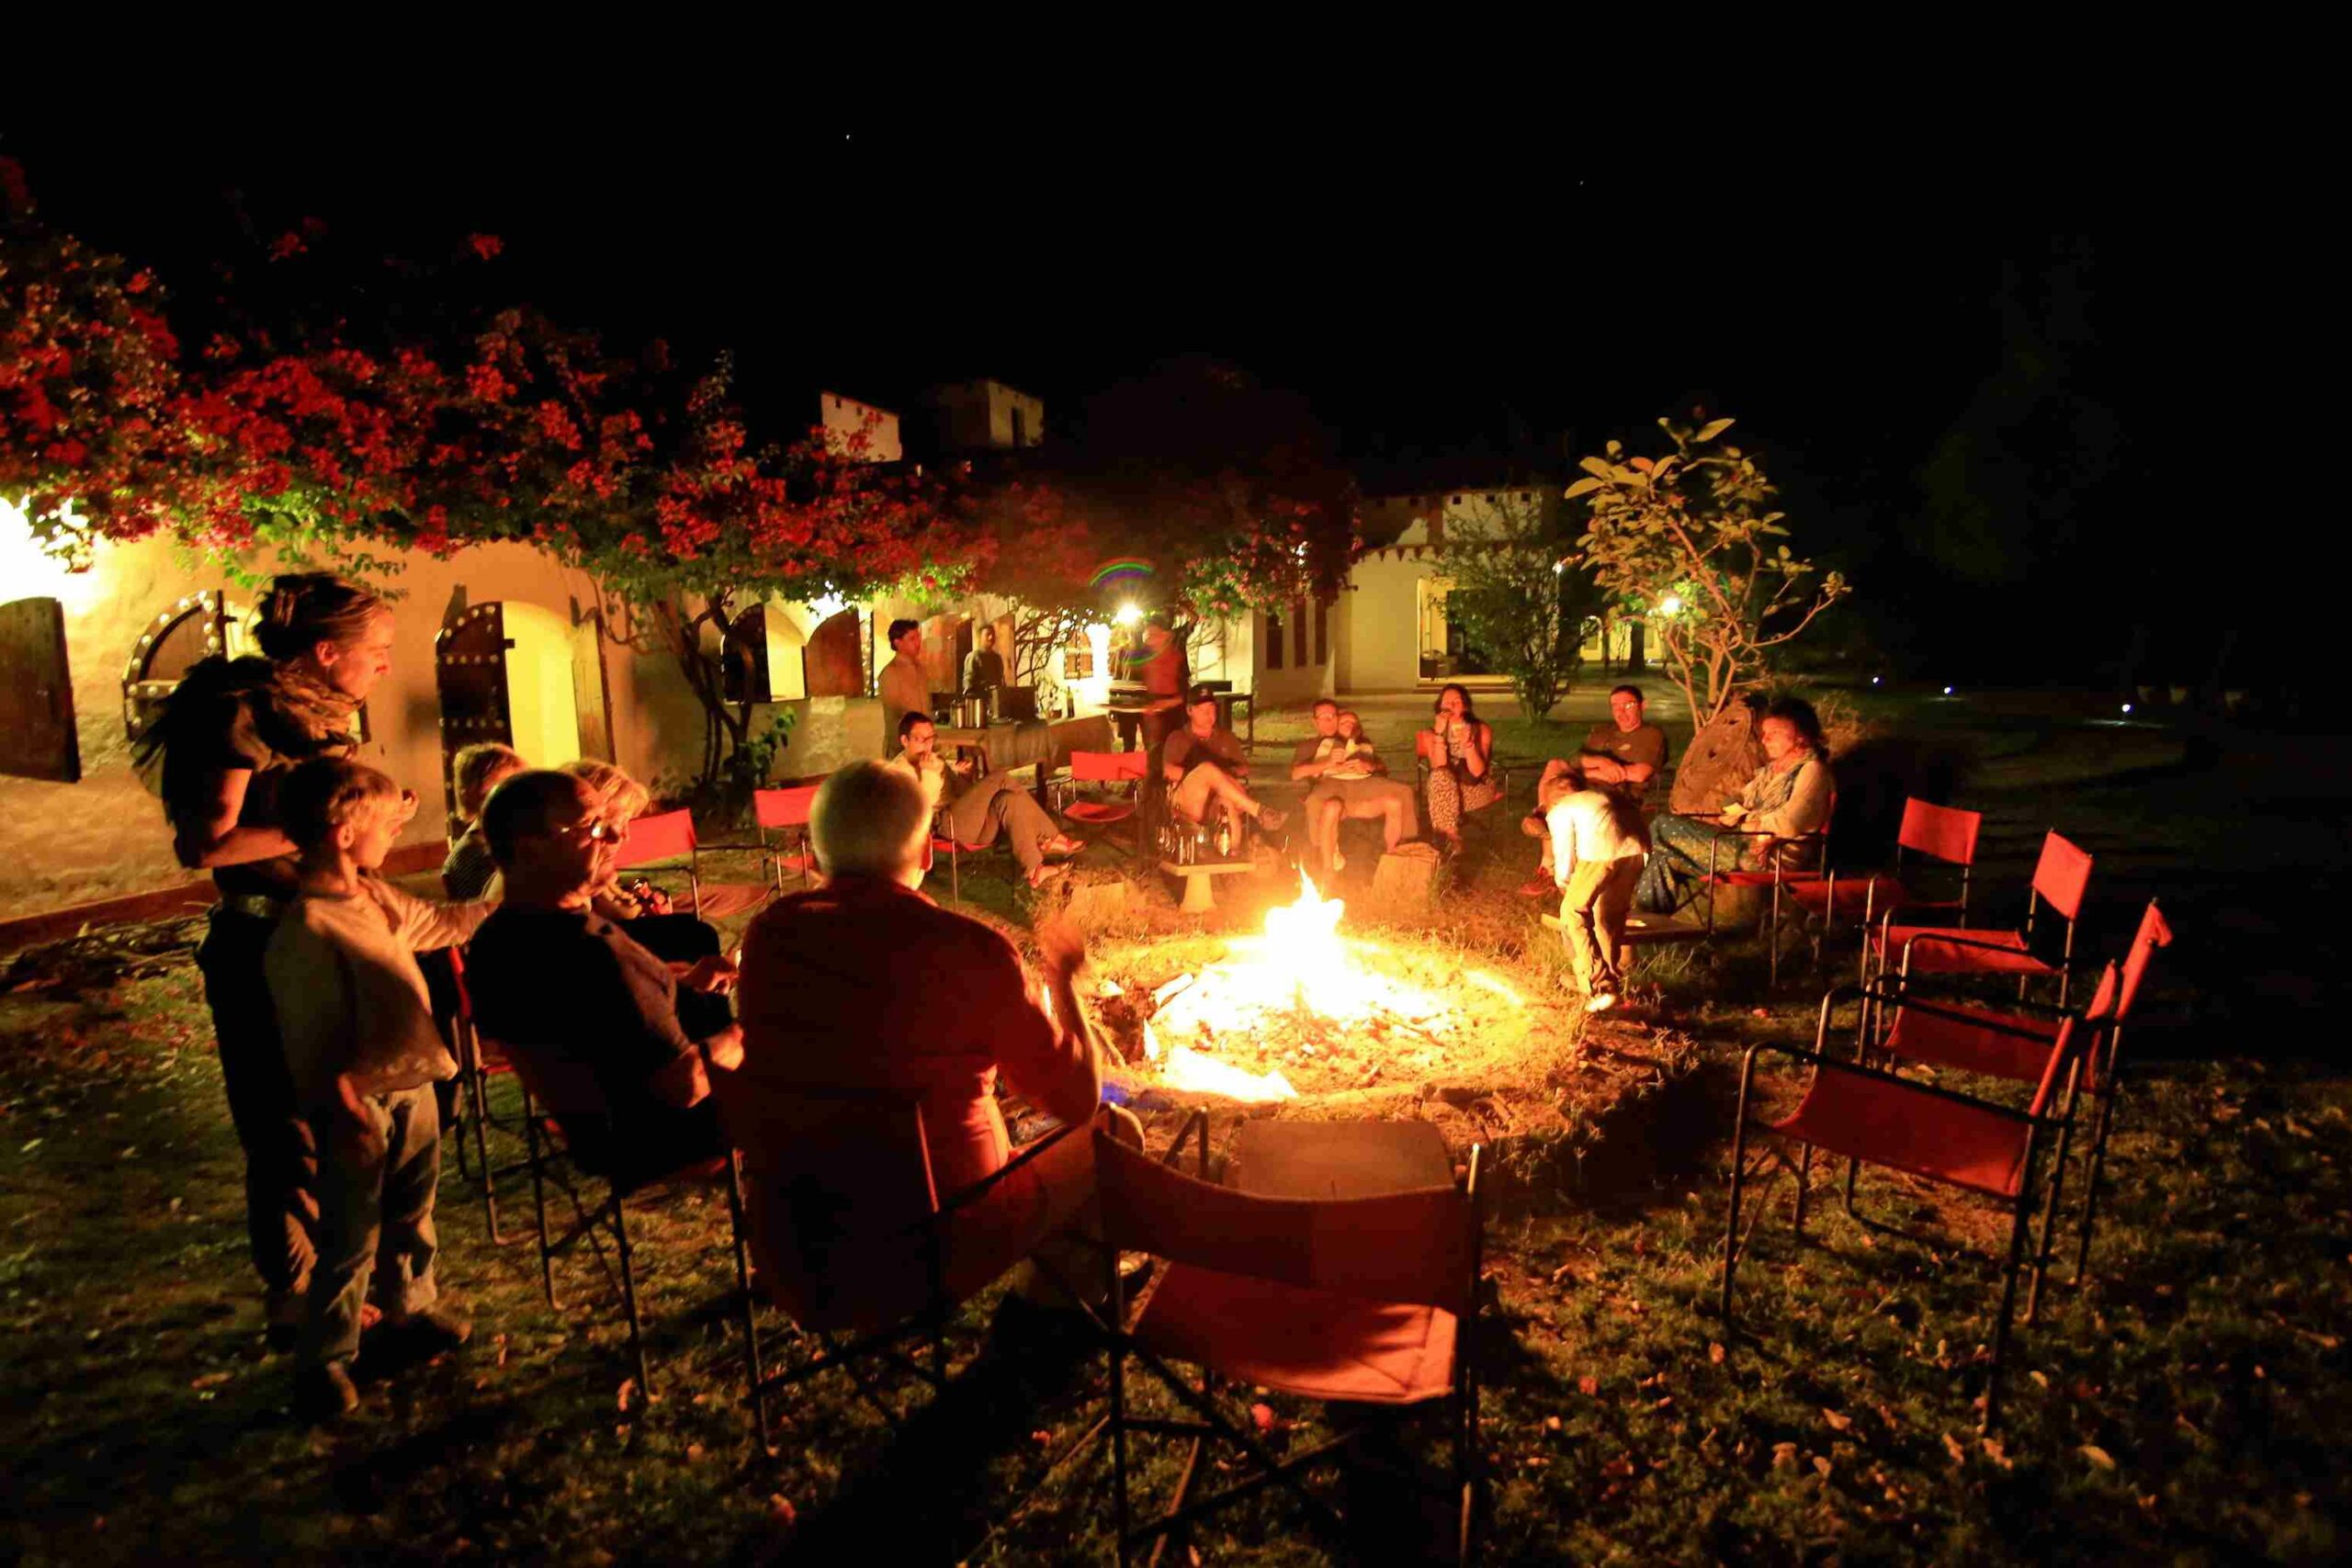 Guests can unwind, have bonfires and relax at the Chambal Safari Lodge